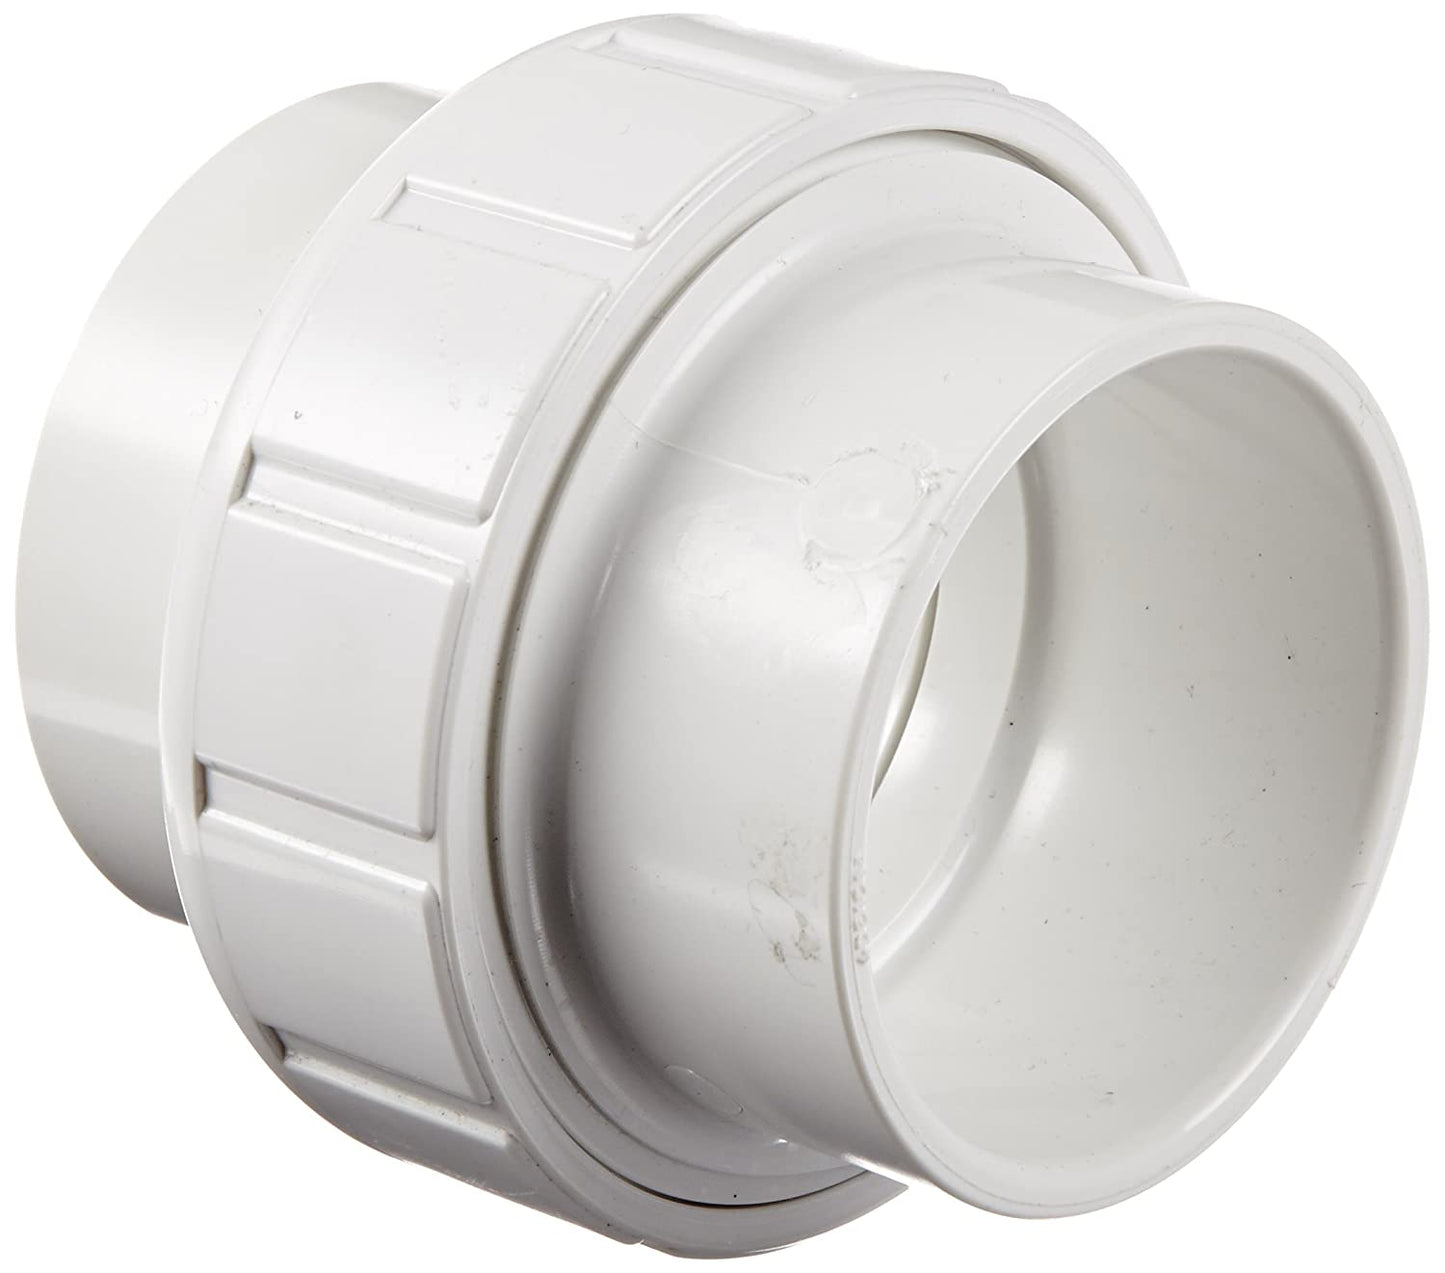 457-020 - PVC Pipe Fitting, Union with Buna O-Ring, Schedule 40, 2" Socket